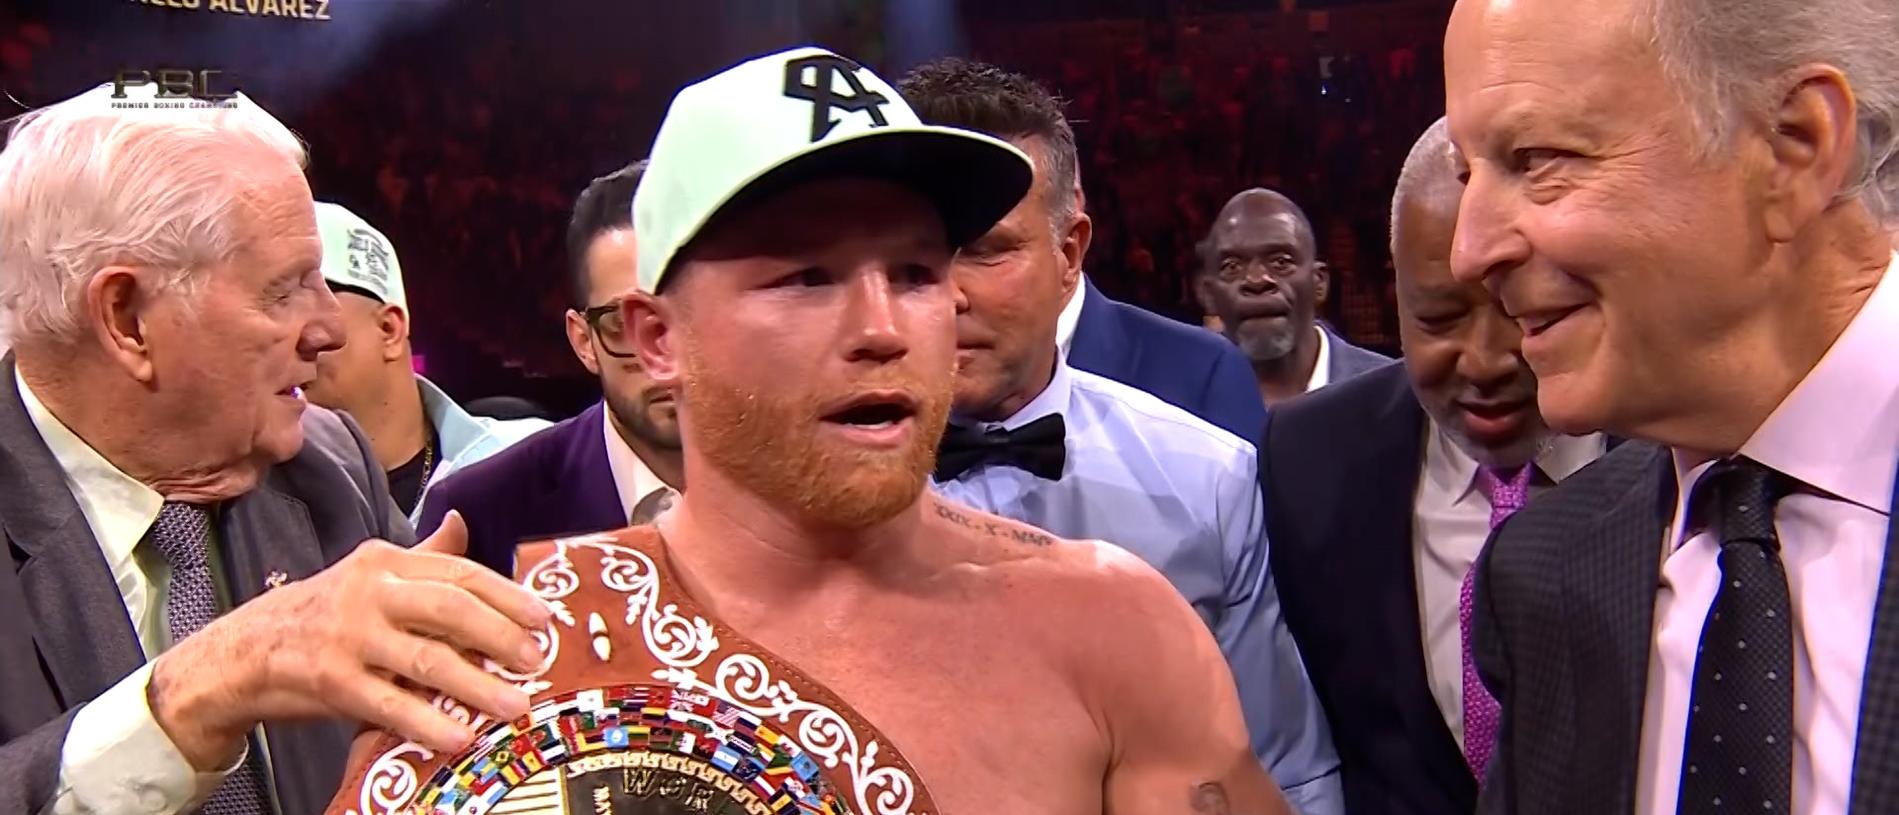 Canelo defends his crown yet again.